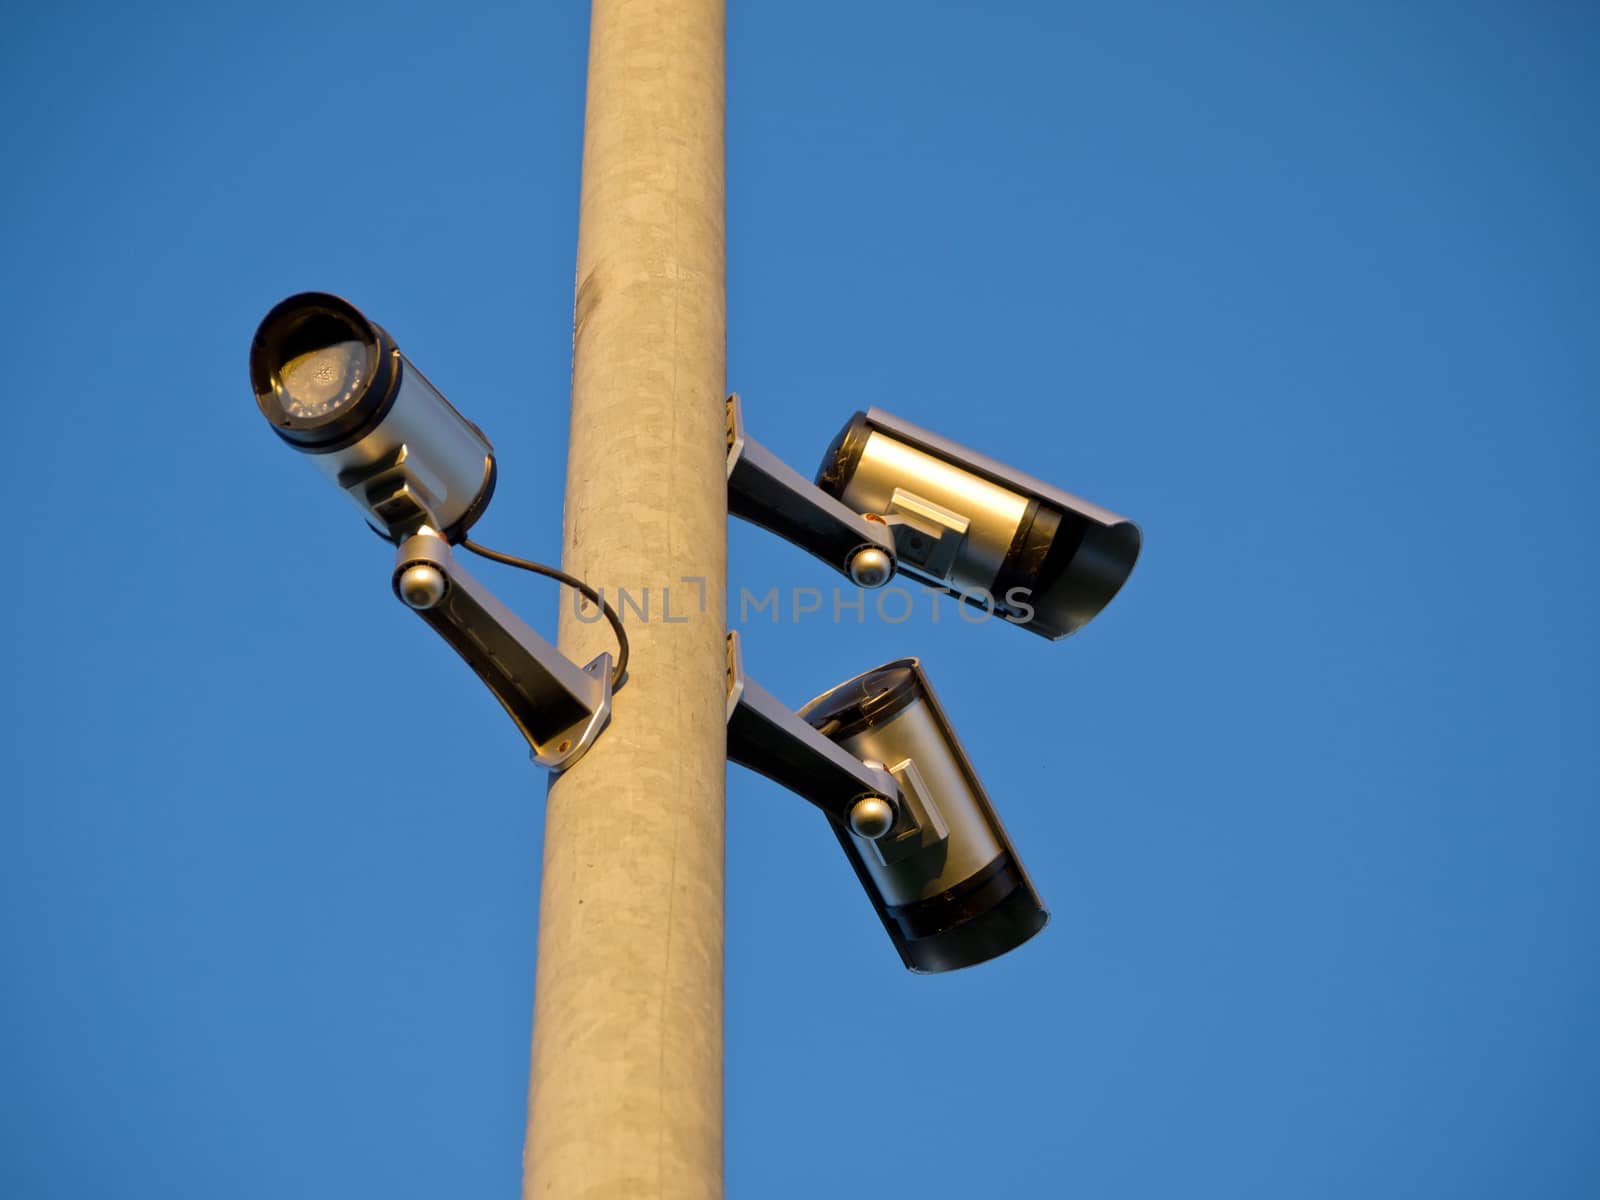 Security surveillance cameras on a pole by Ronyzmbow